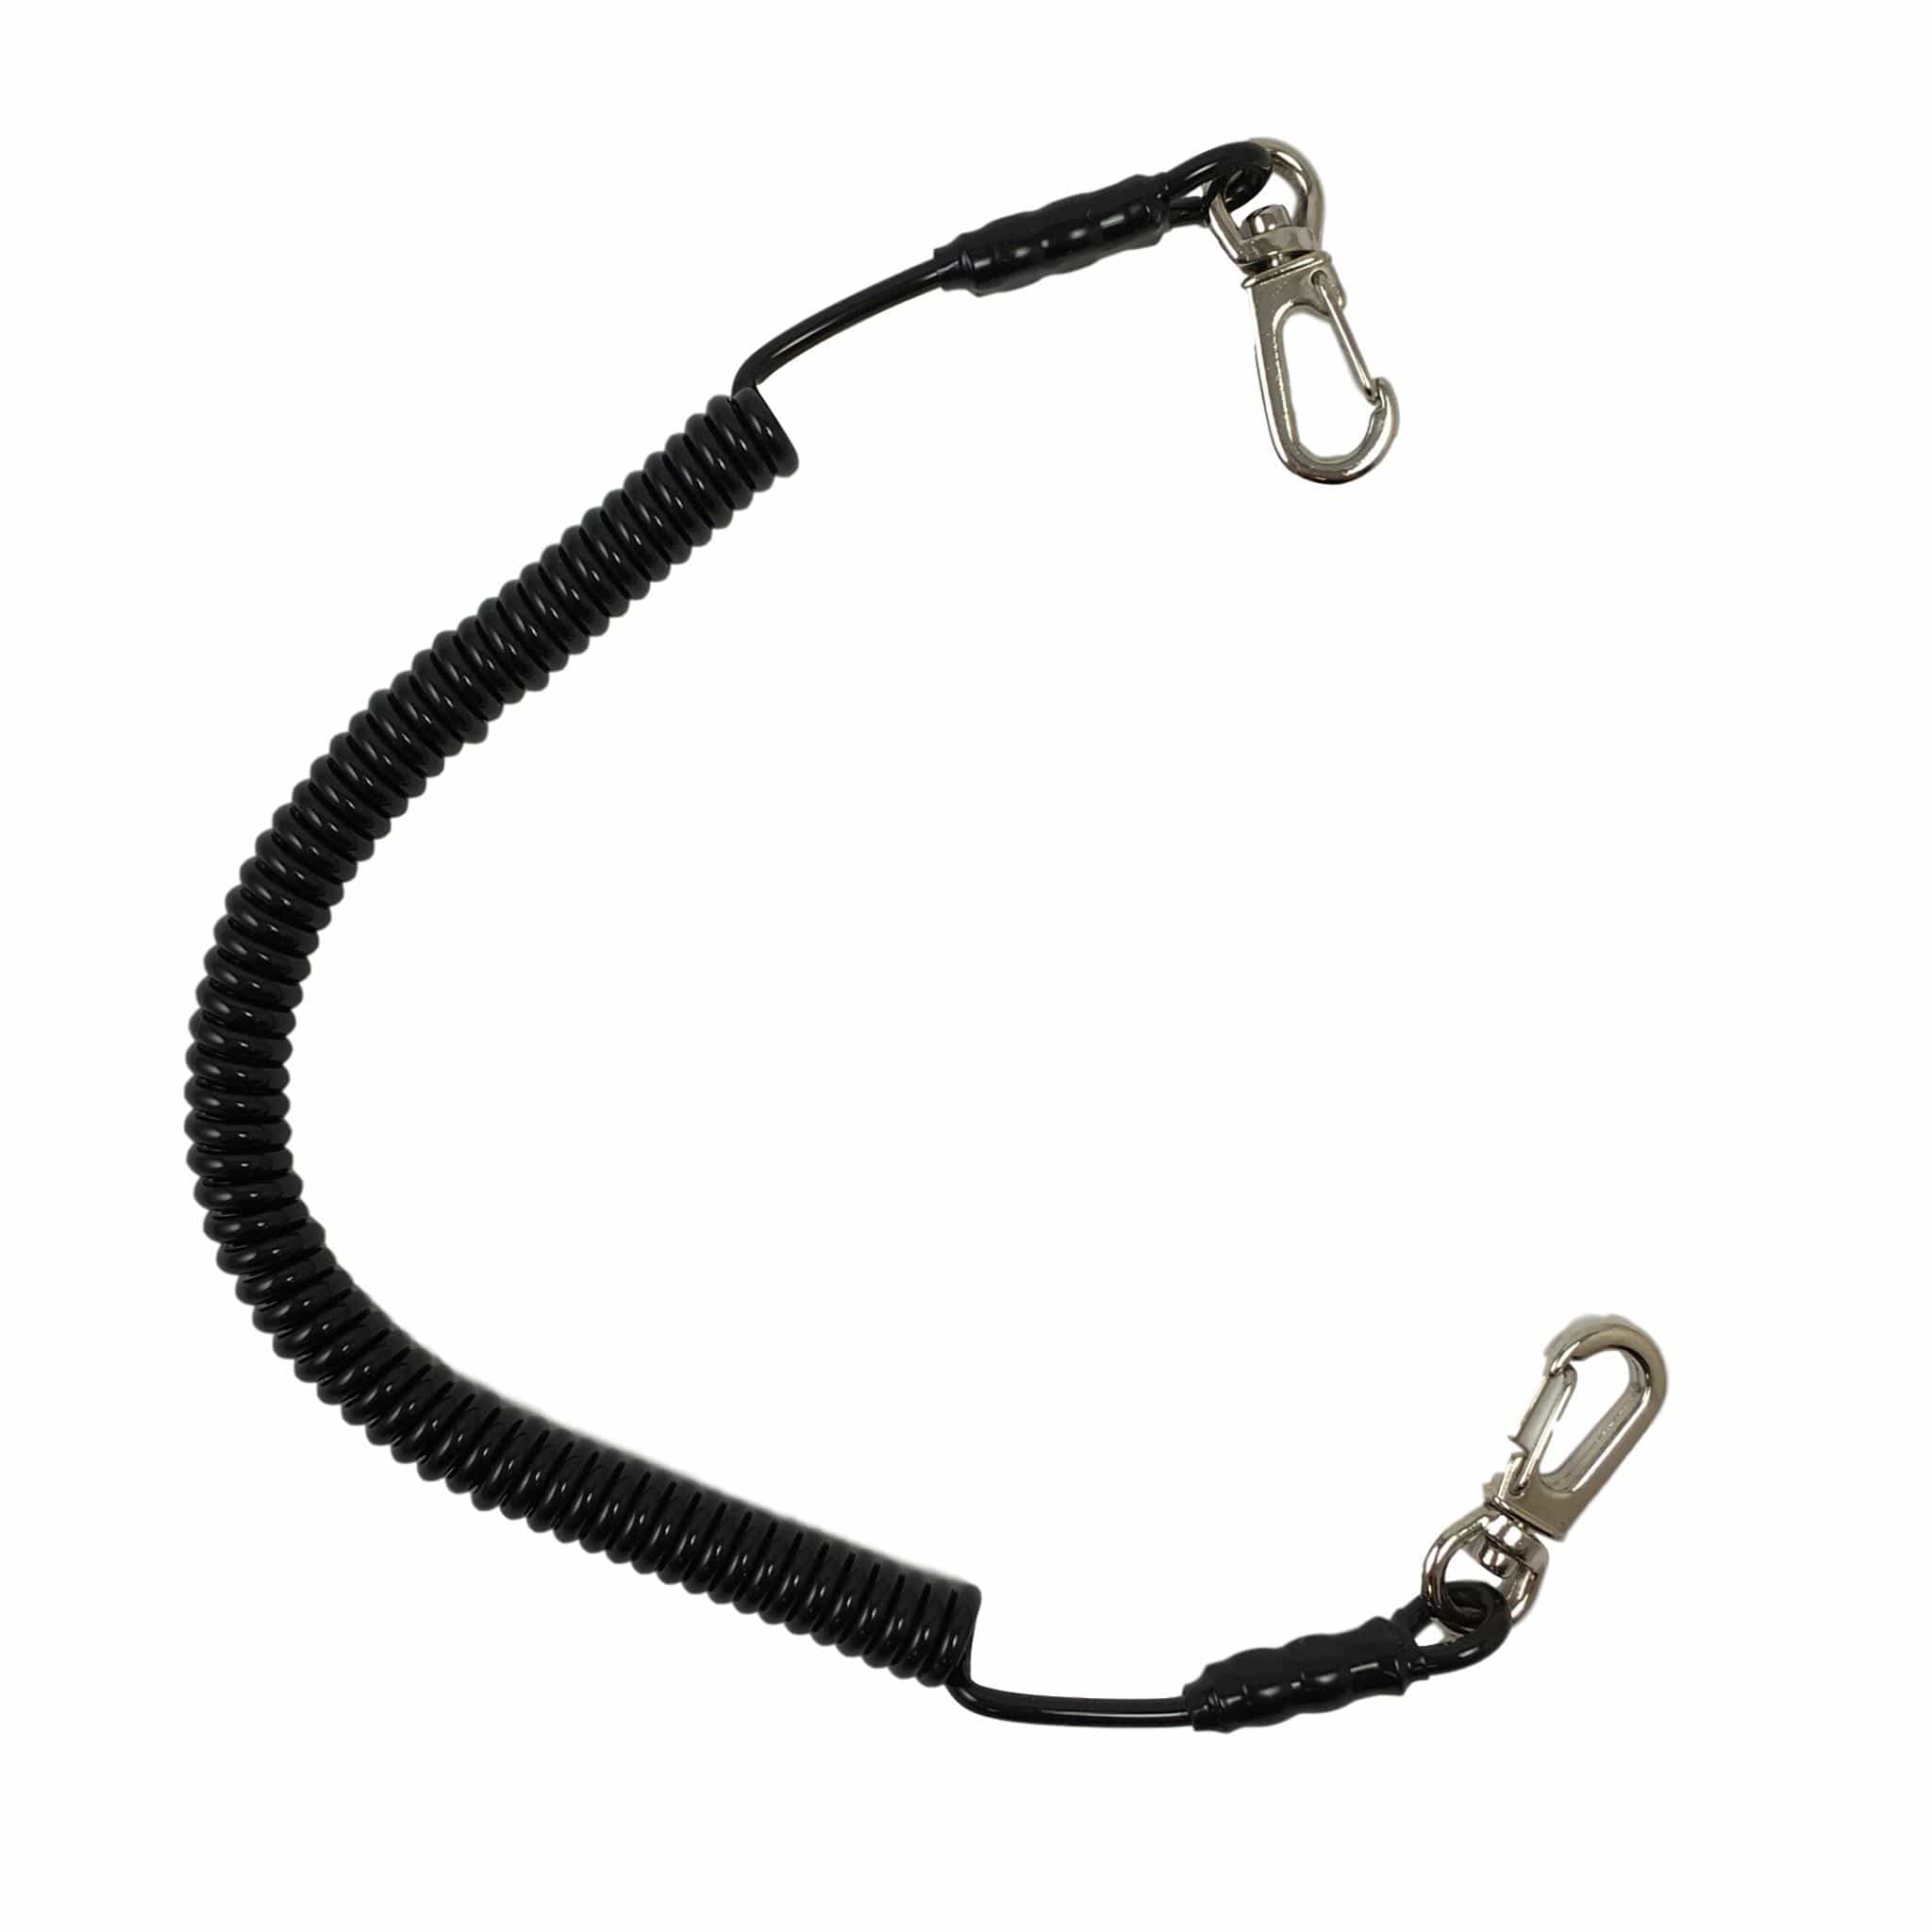  Fishing Rod Safety Line Lanyard 200lb Tested Stainless  Carabiner and 6 Foot Tether for Rod and Reel Latex Covered and Anti Tangle  or Snag : Sports & Outdoors